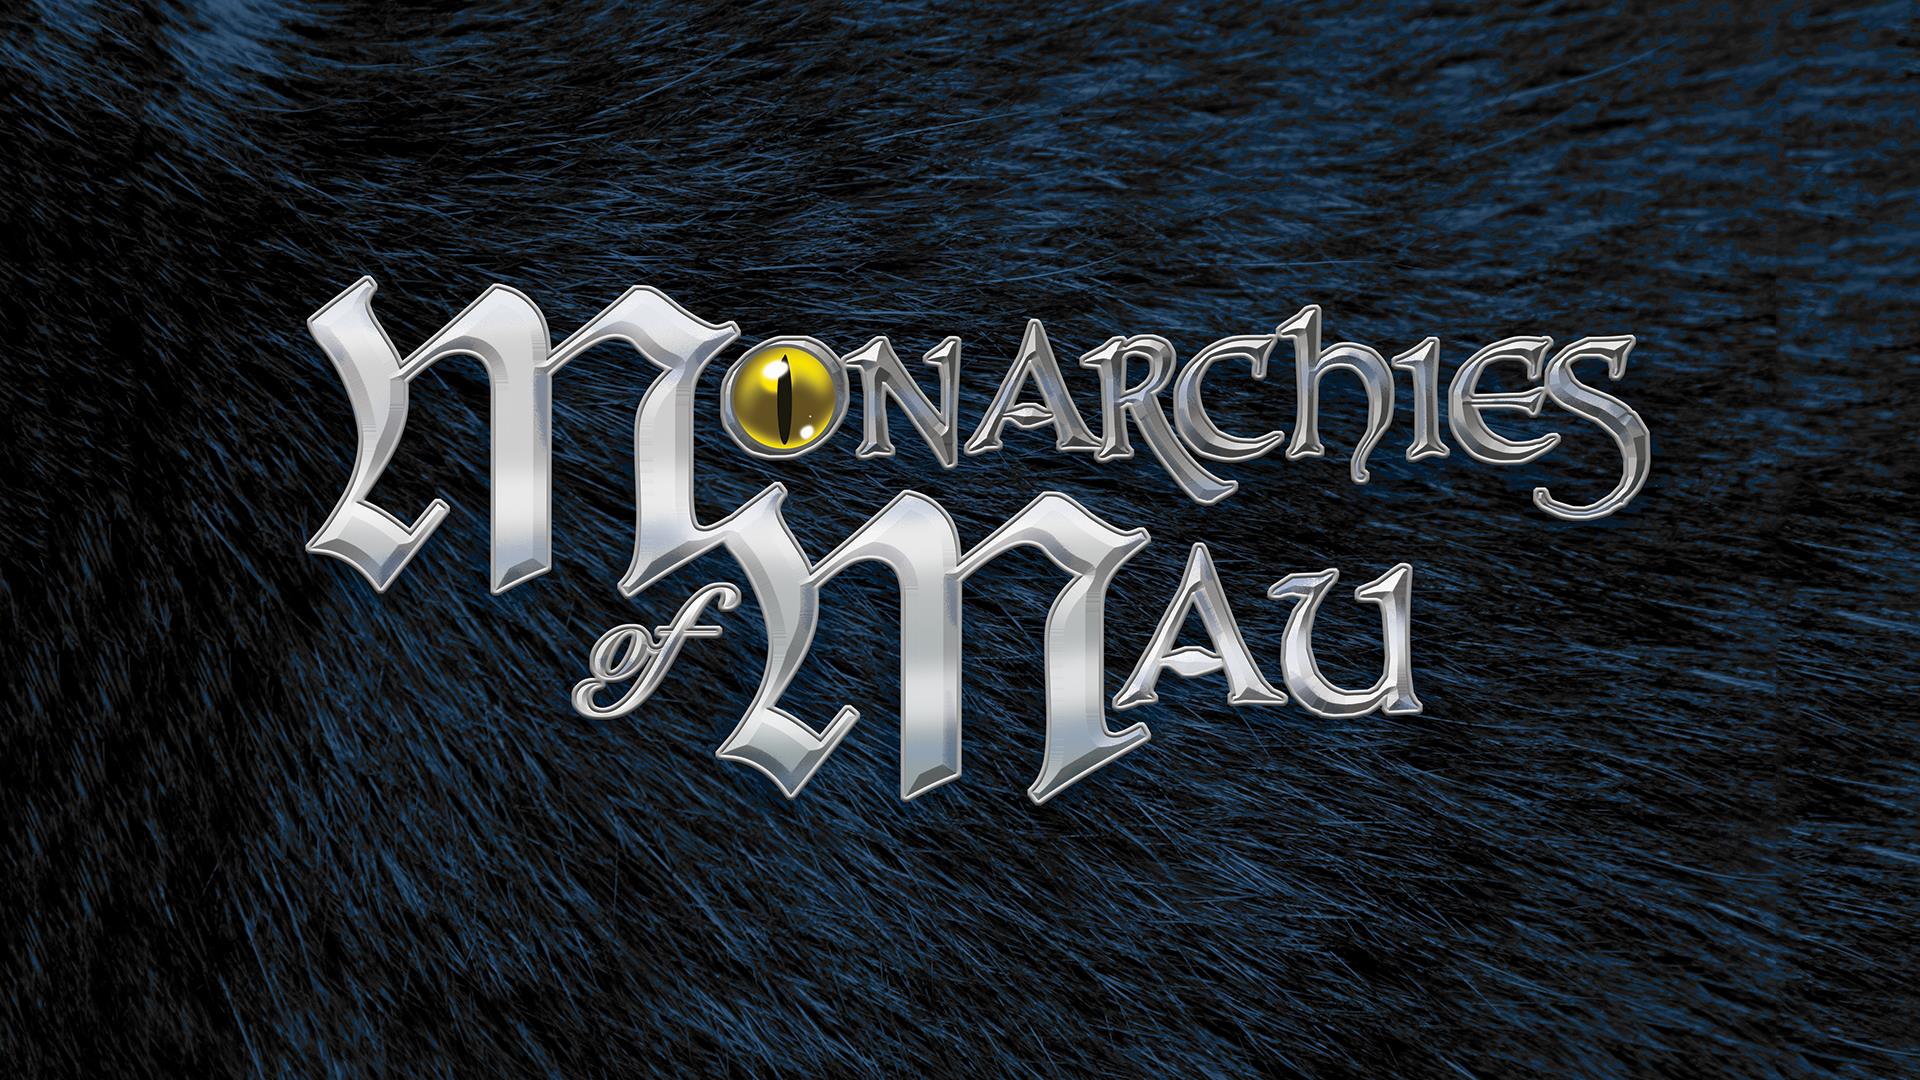 Review of Monarchies of Mau